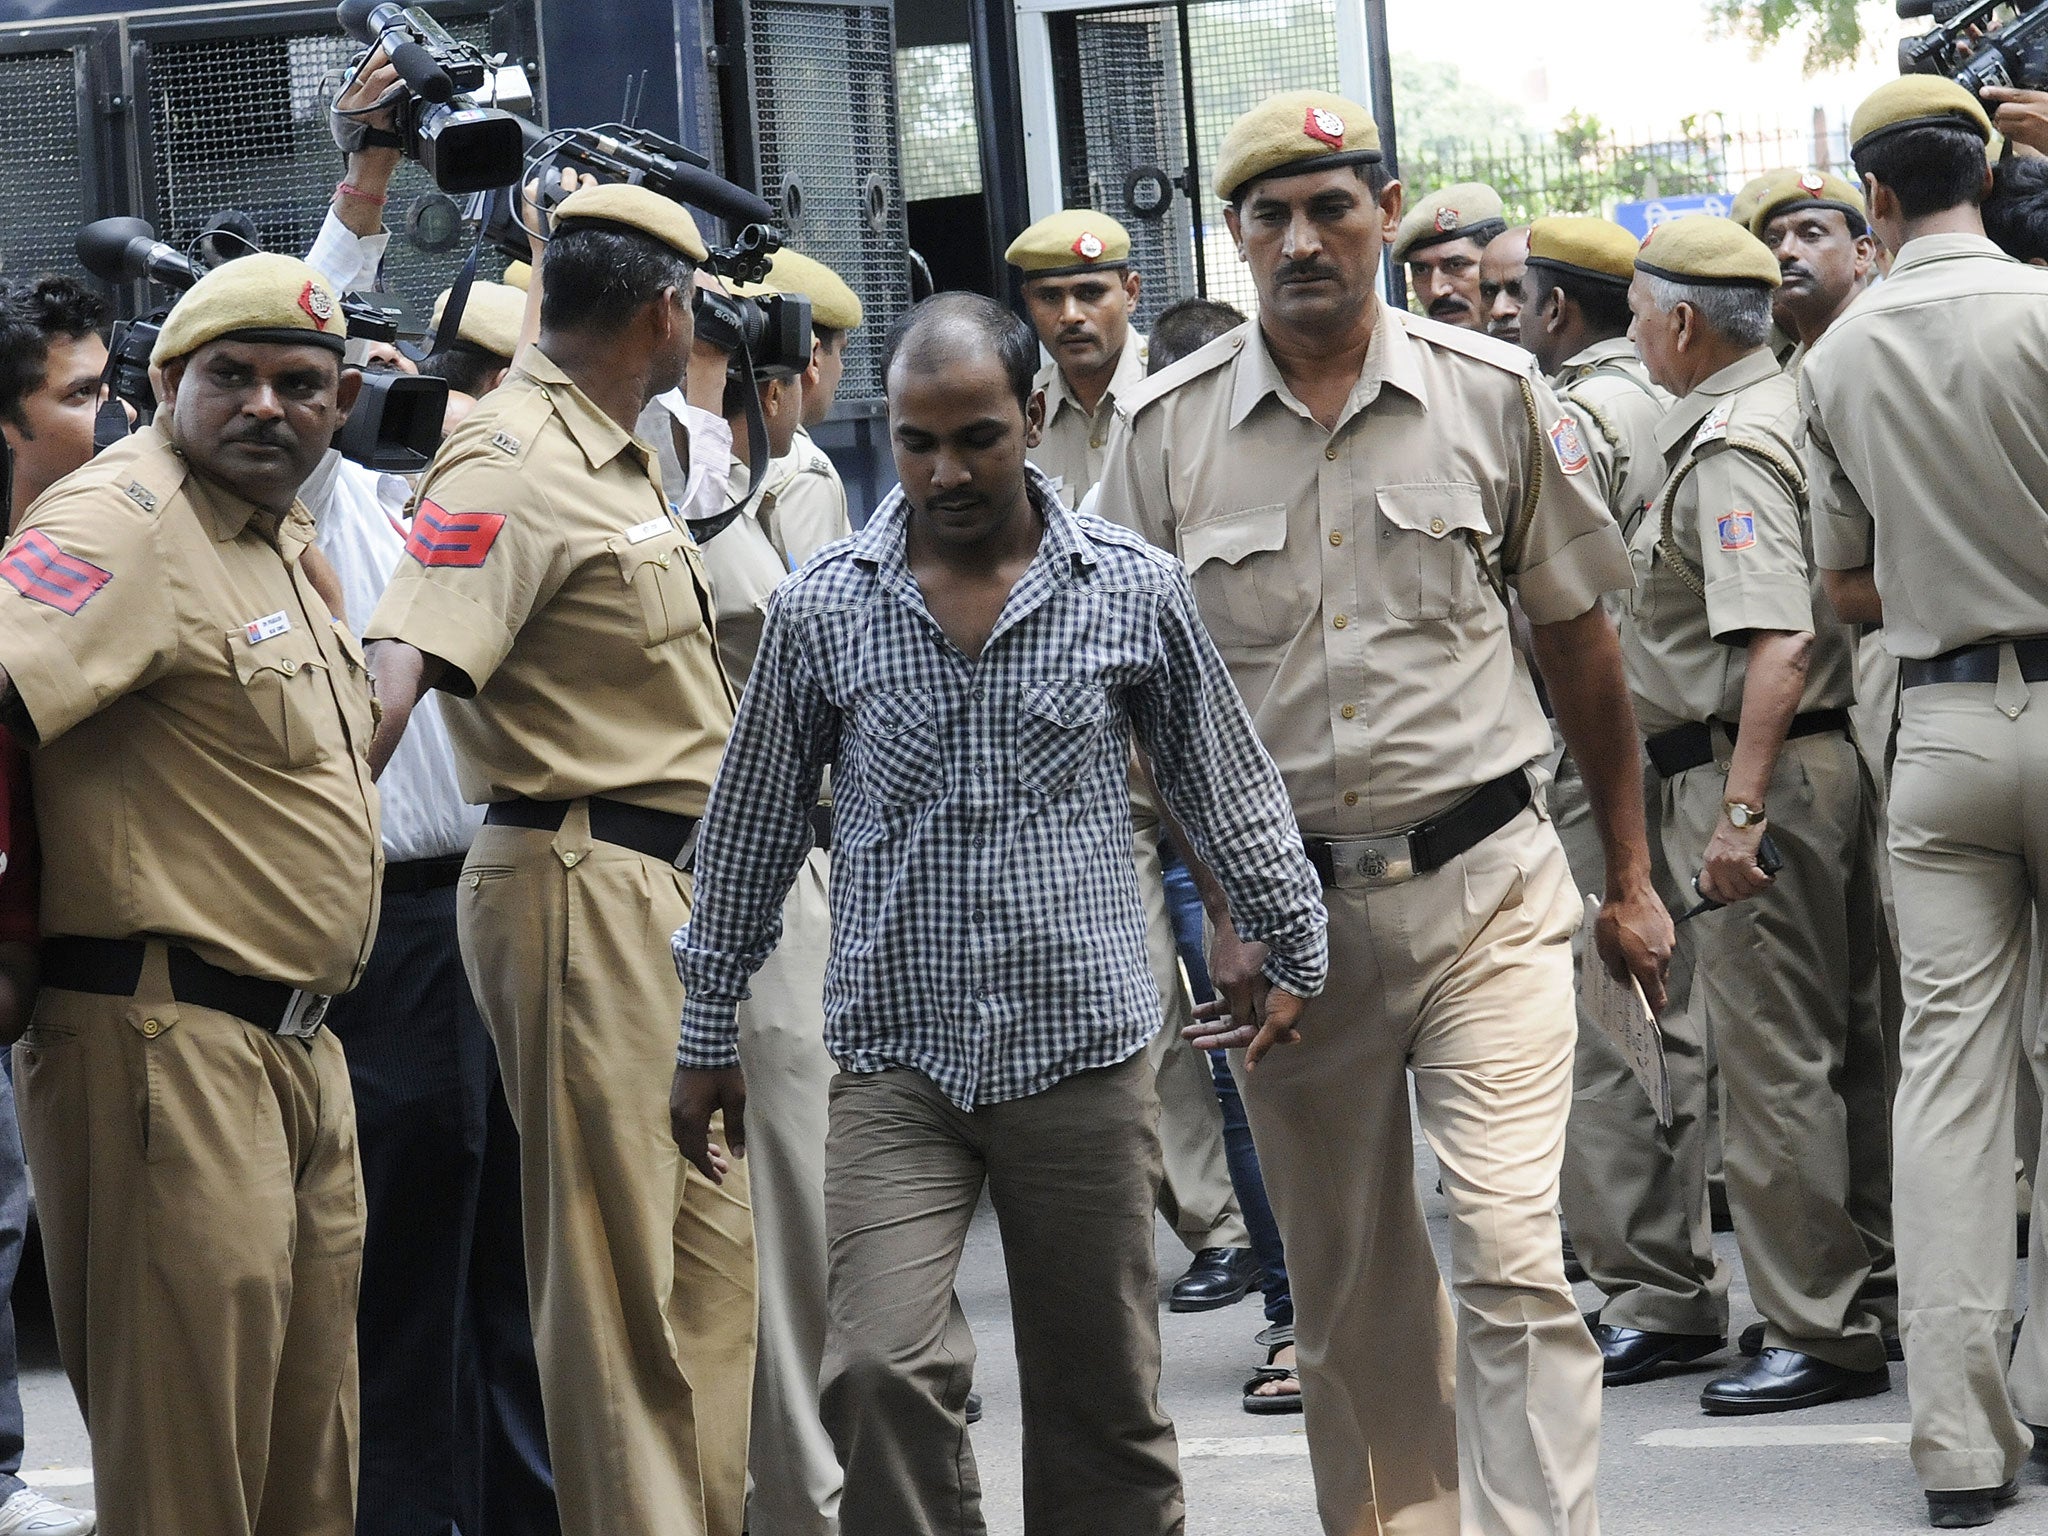 Delhi bus gang rape accused Mukesh Singh brought to Delhi High Court under high security for hearing in New Delhi, 2013  